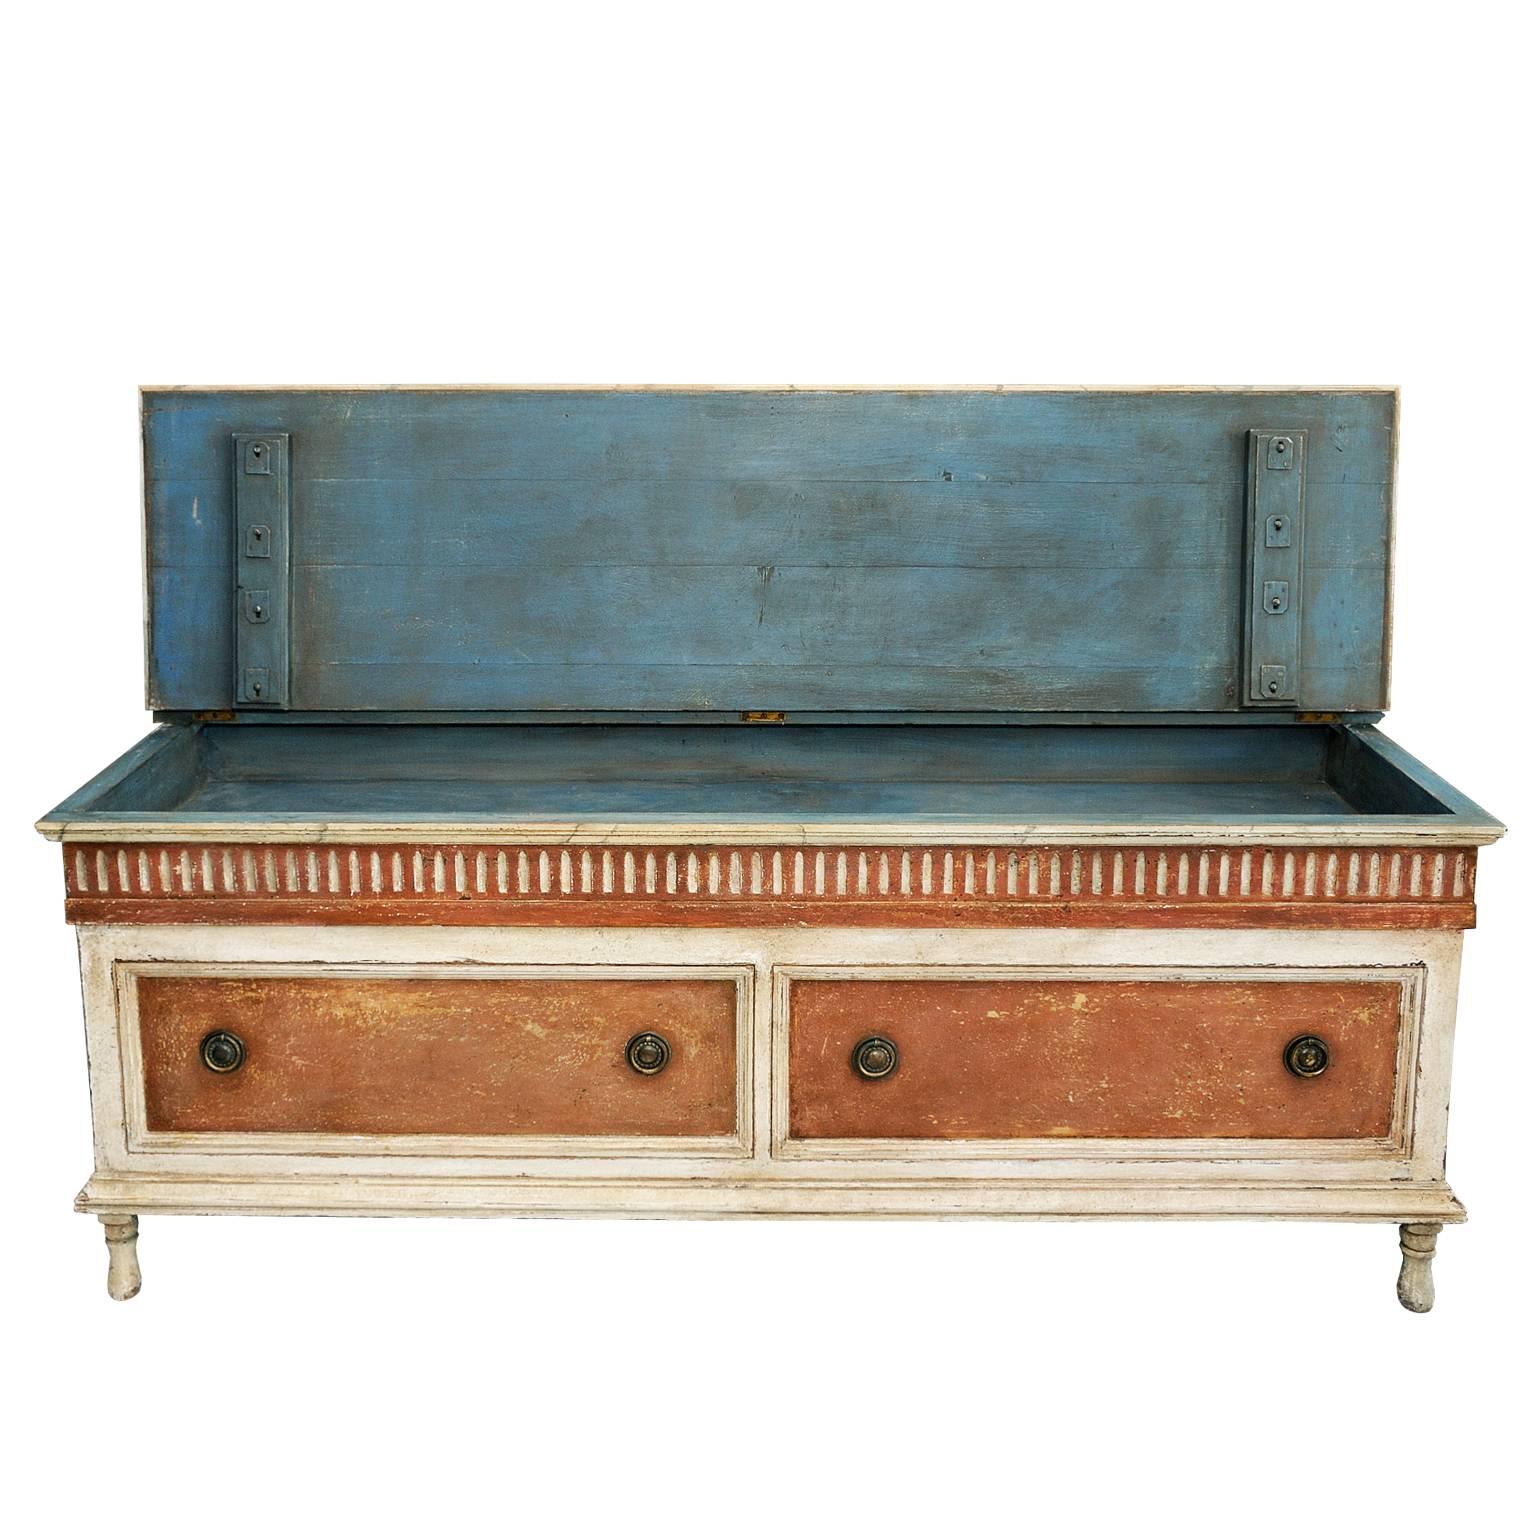 This is a highly desirable Gustavian period, Swedish late 18th century style painted faux marble blanket box of very useful proportion, circa 1860.